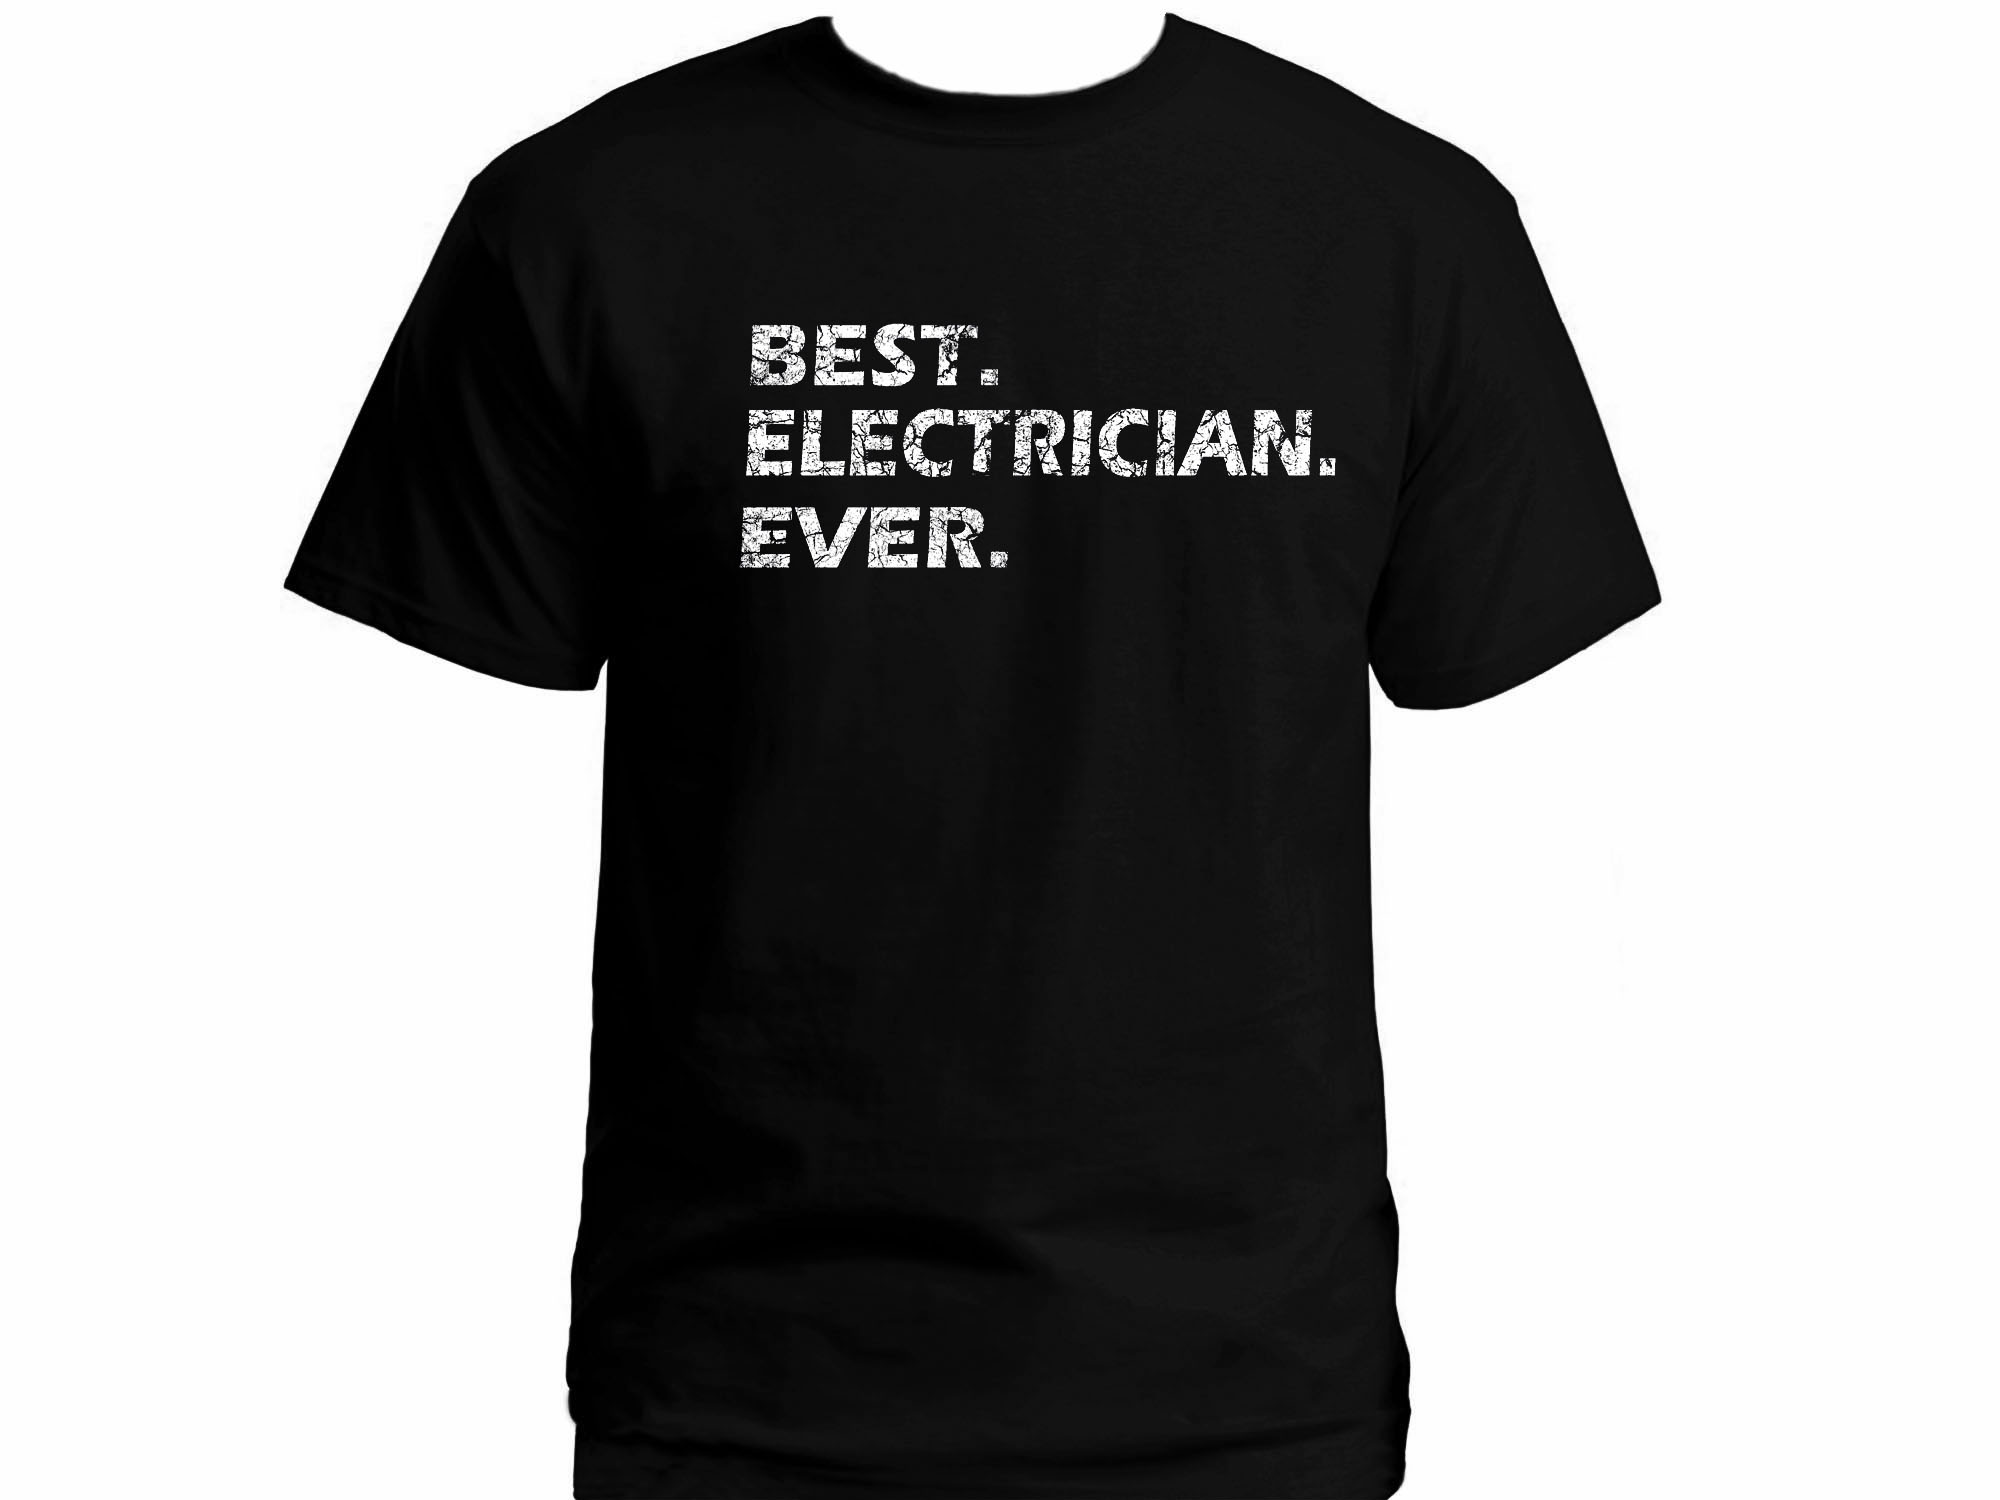 Best electrician ever distressed print black t-shirt